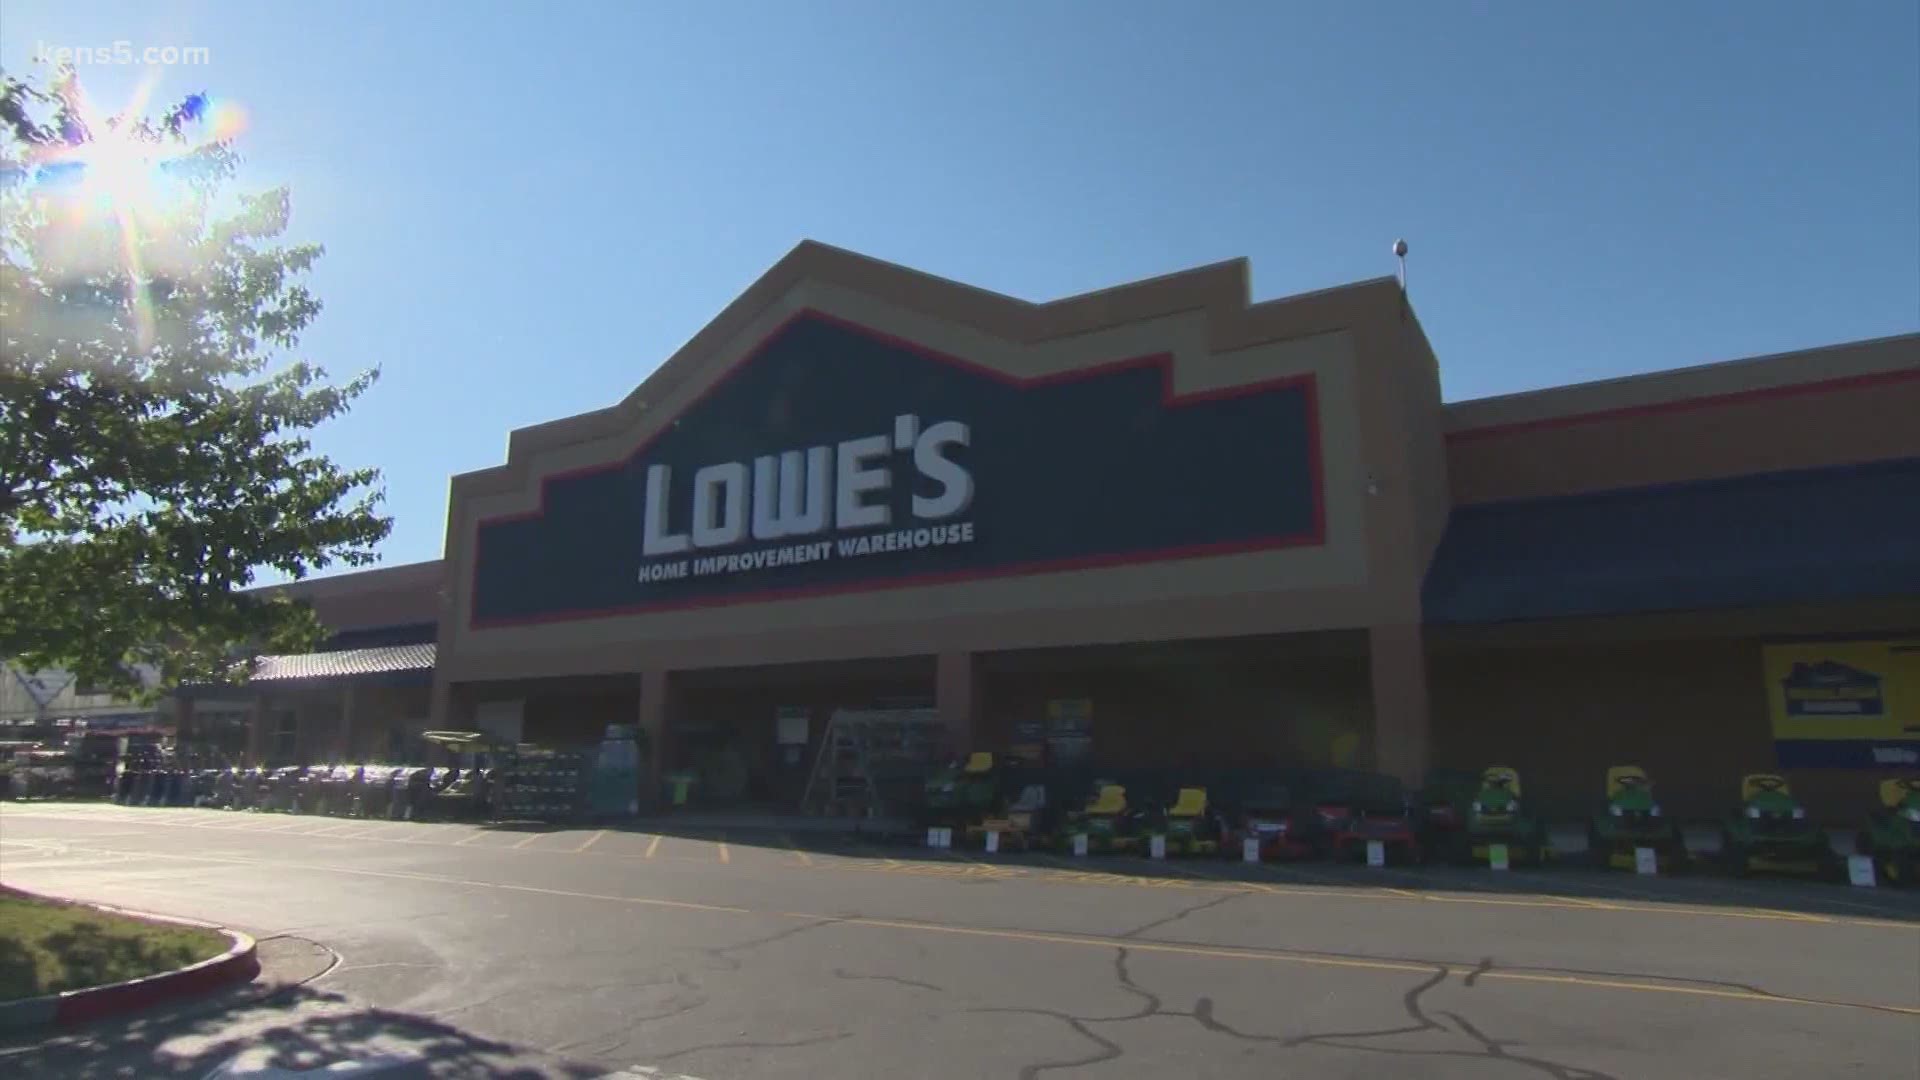 Lowe's is handing out millions of dollars in small grants to help minority-owned small businesses during the pandemic.